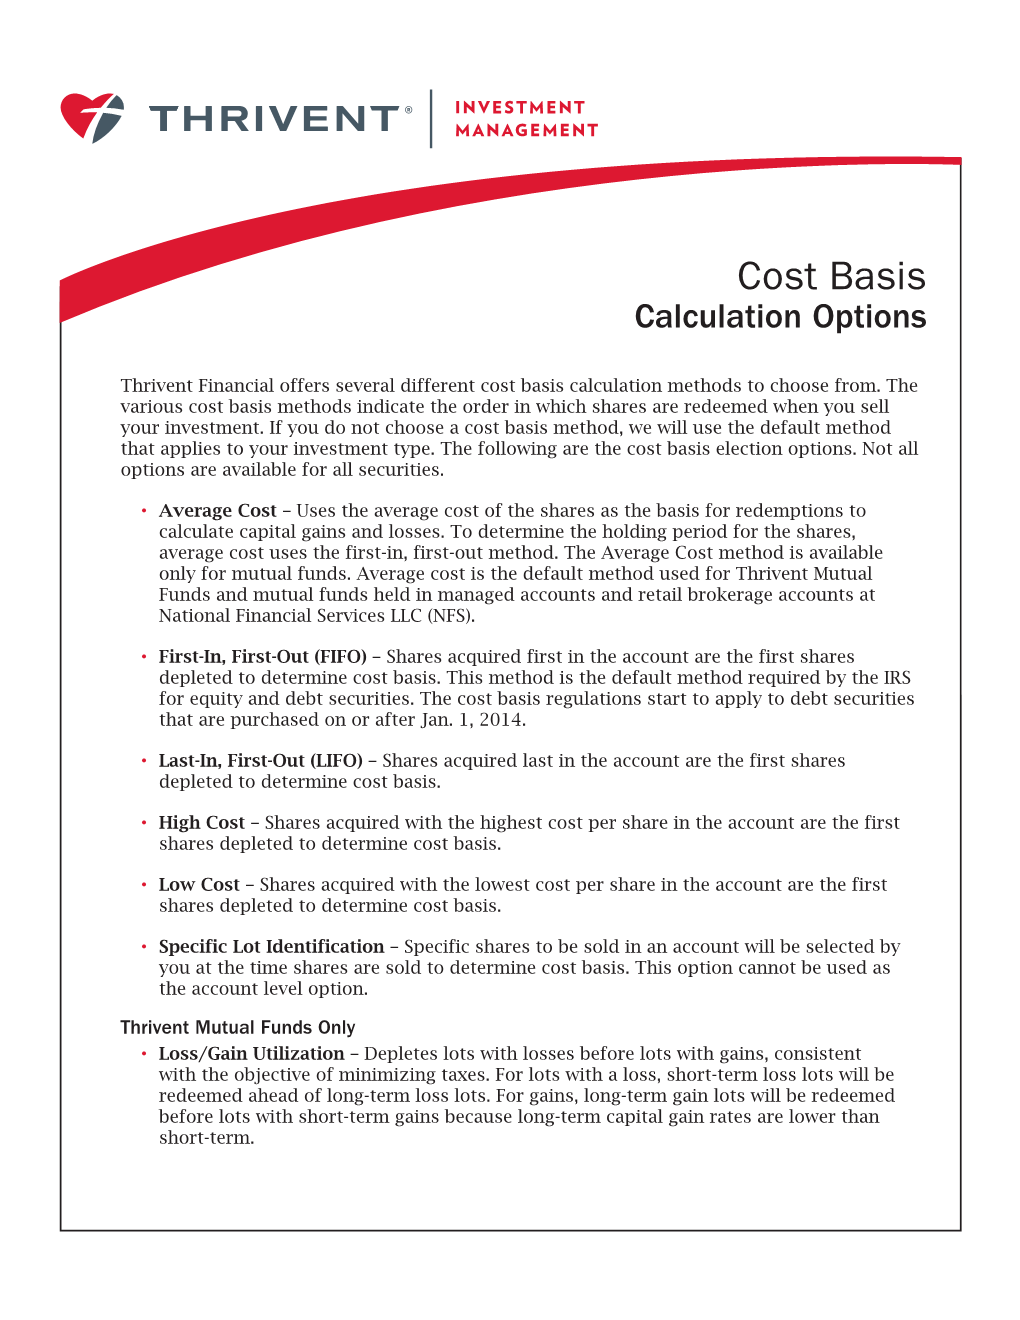 Cost Basis Calculation Options